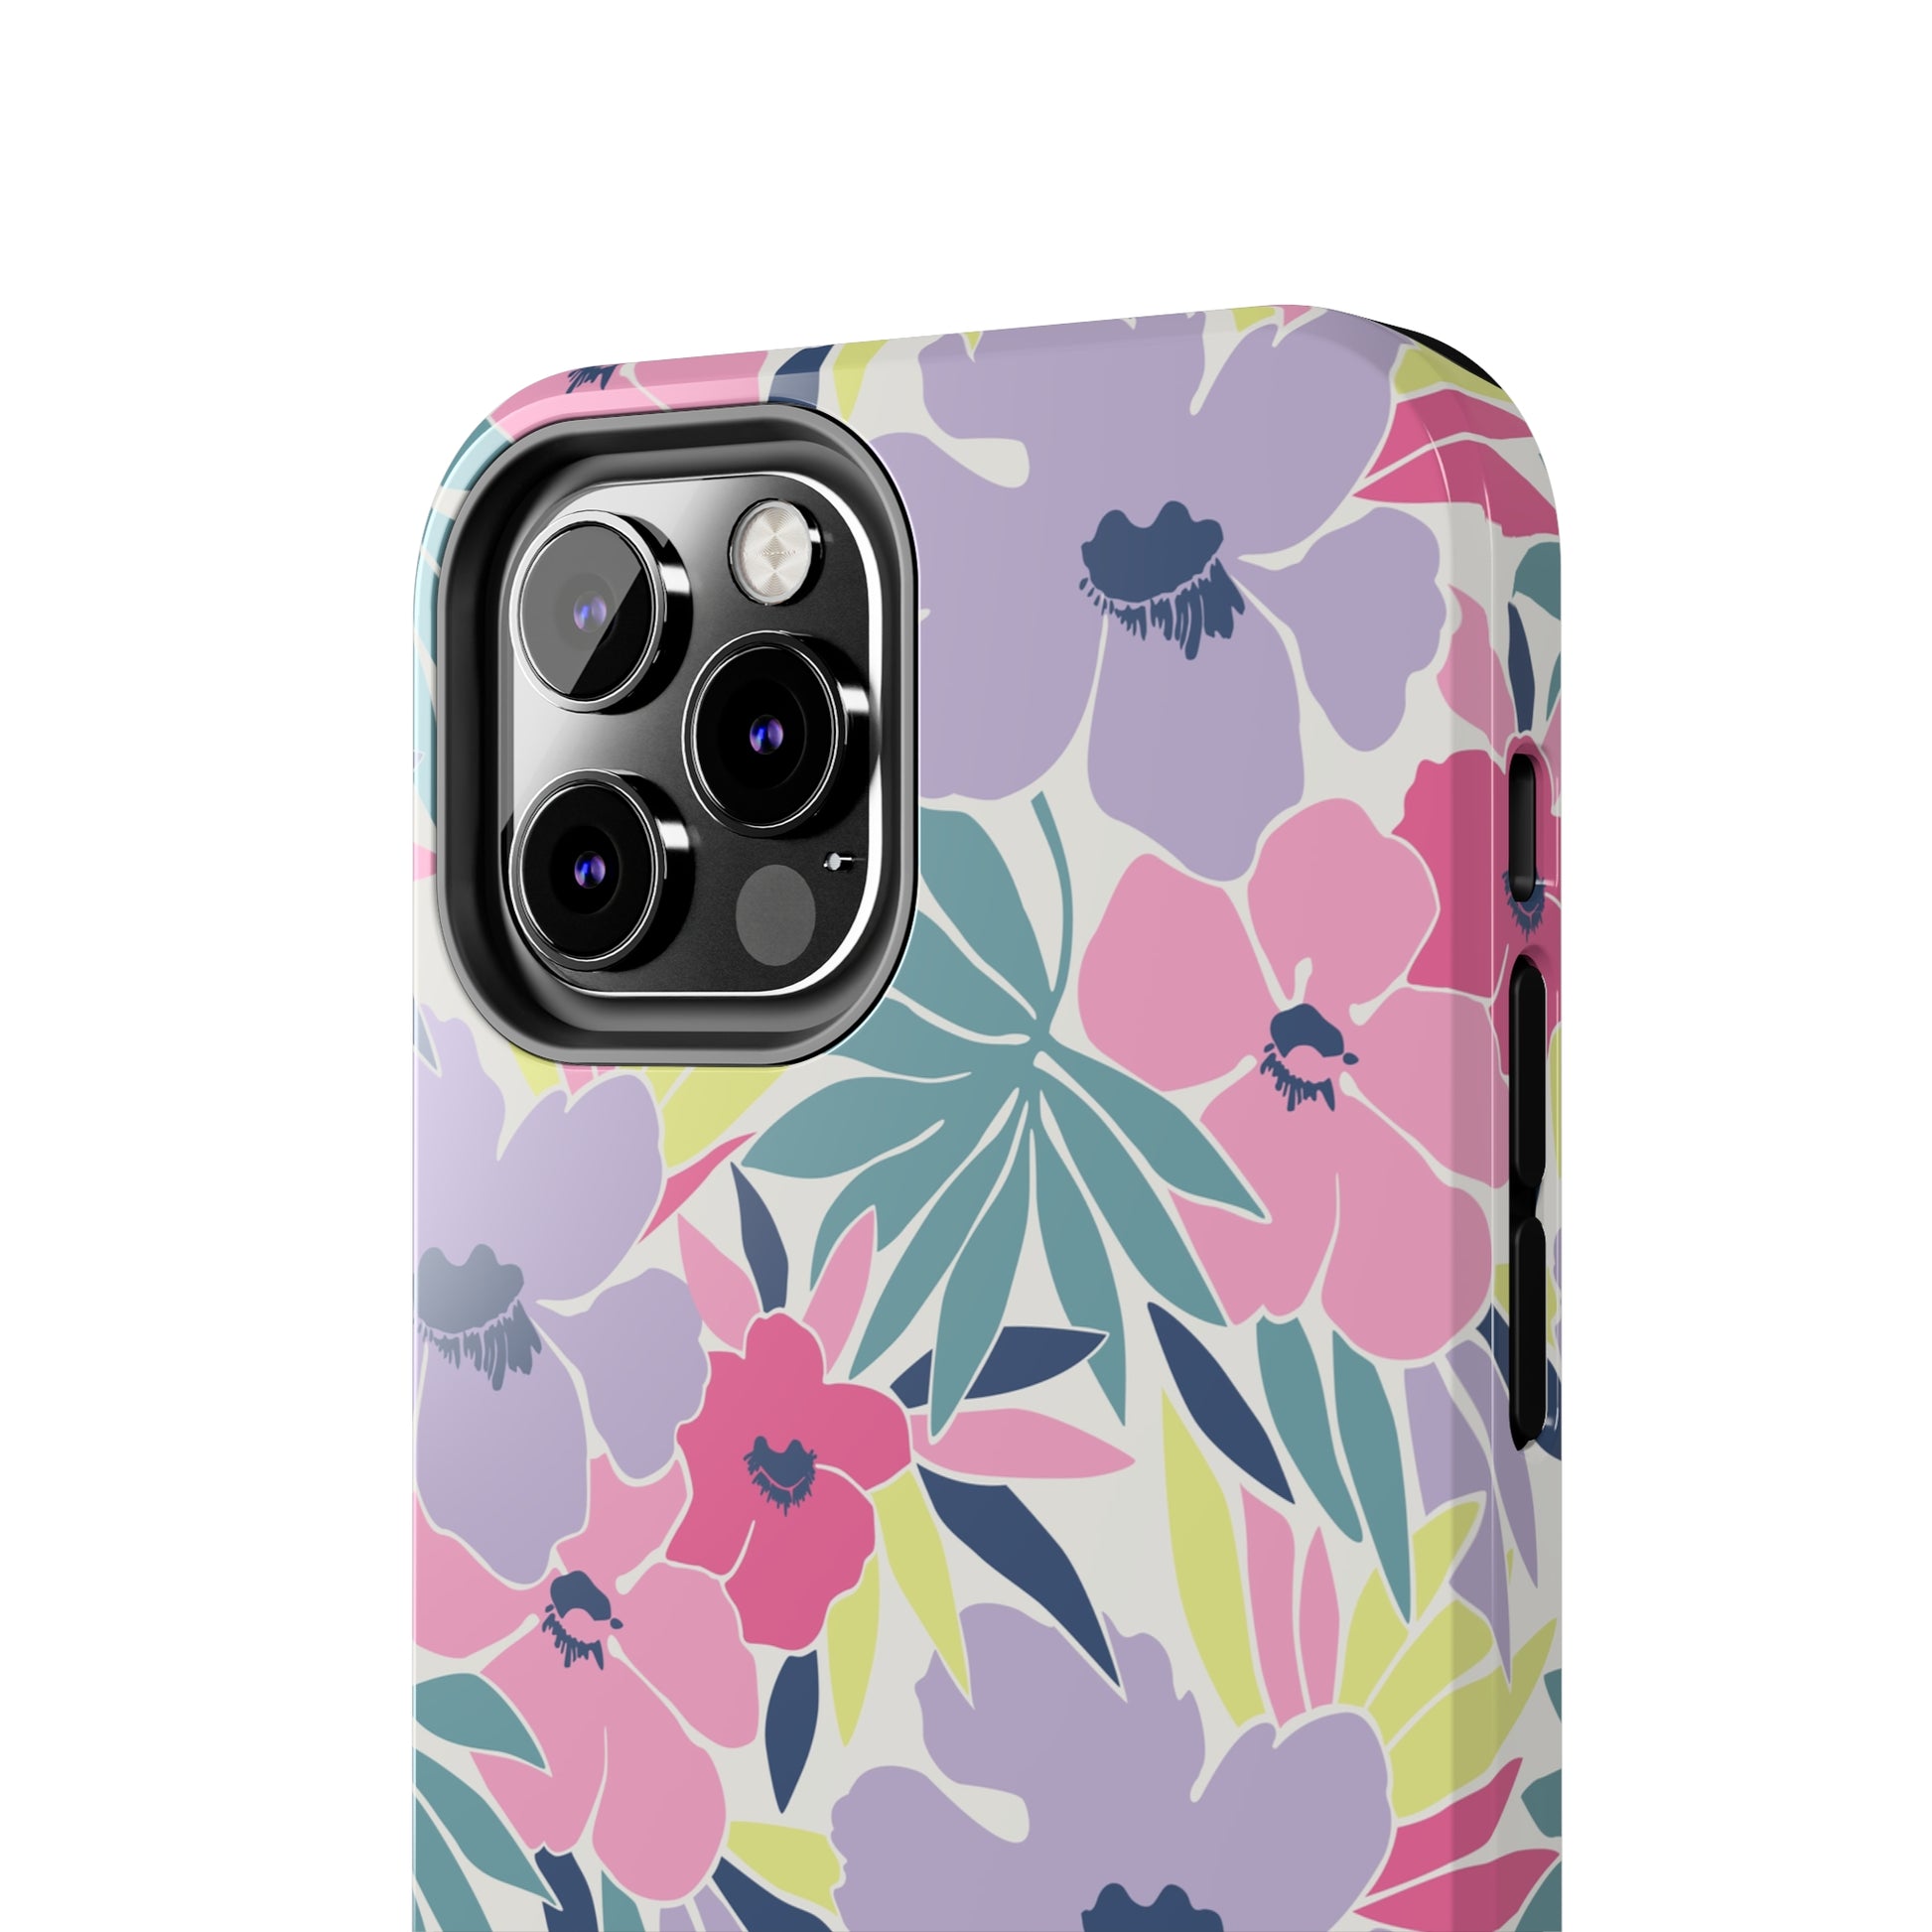 Lula Blooms - Phone Case For